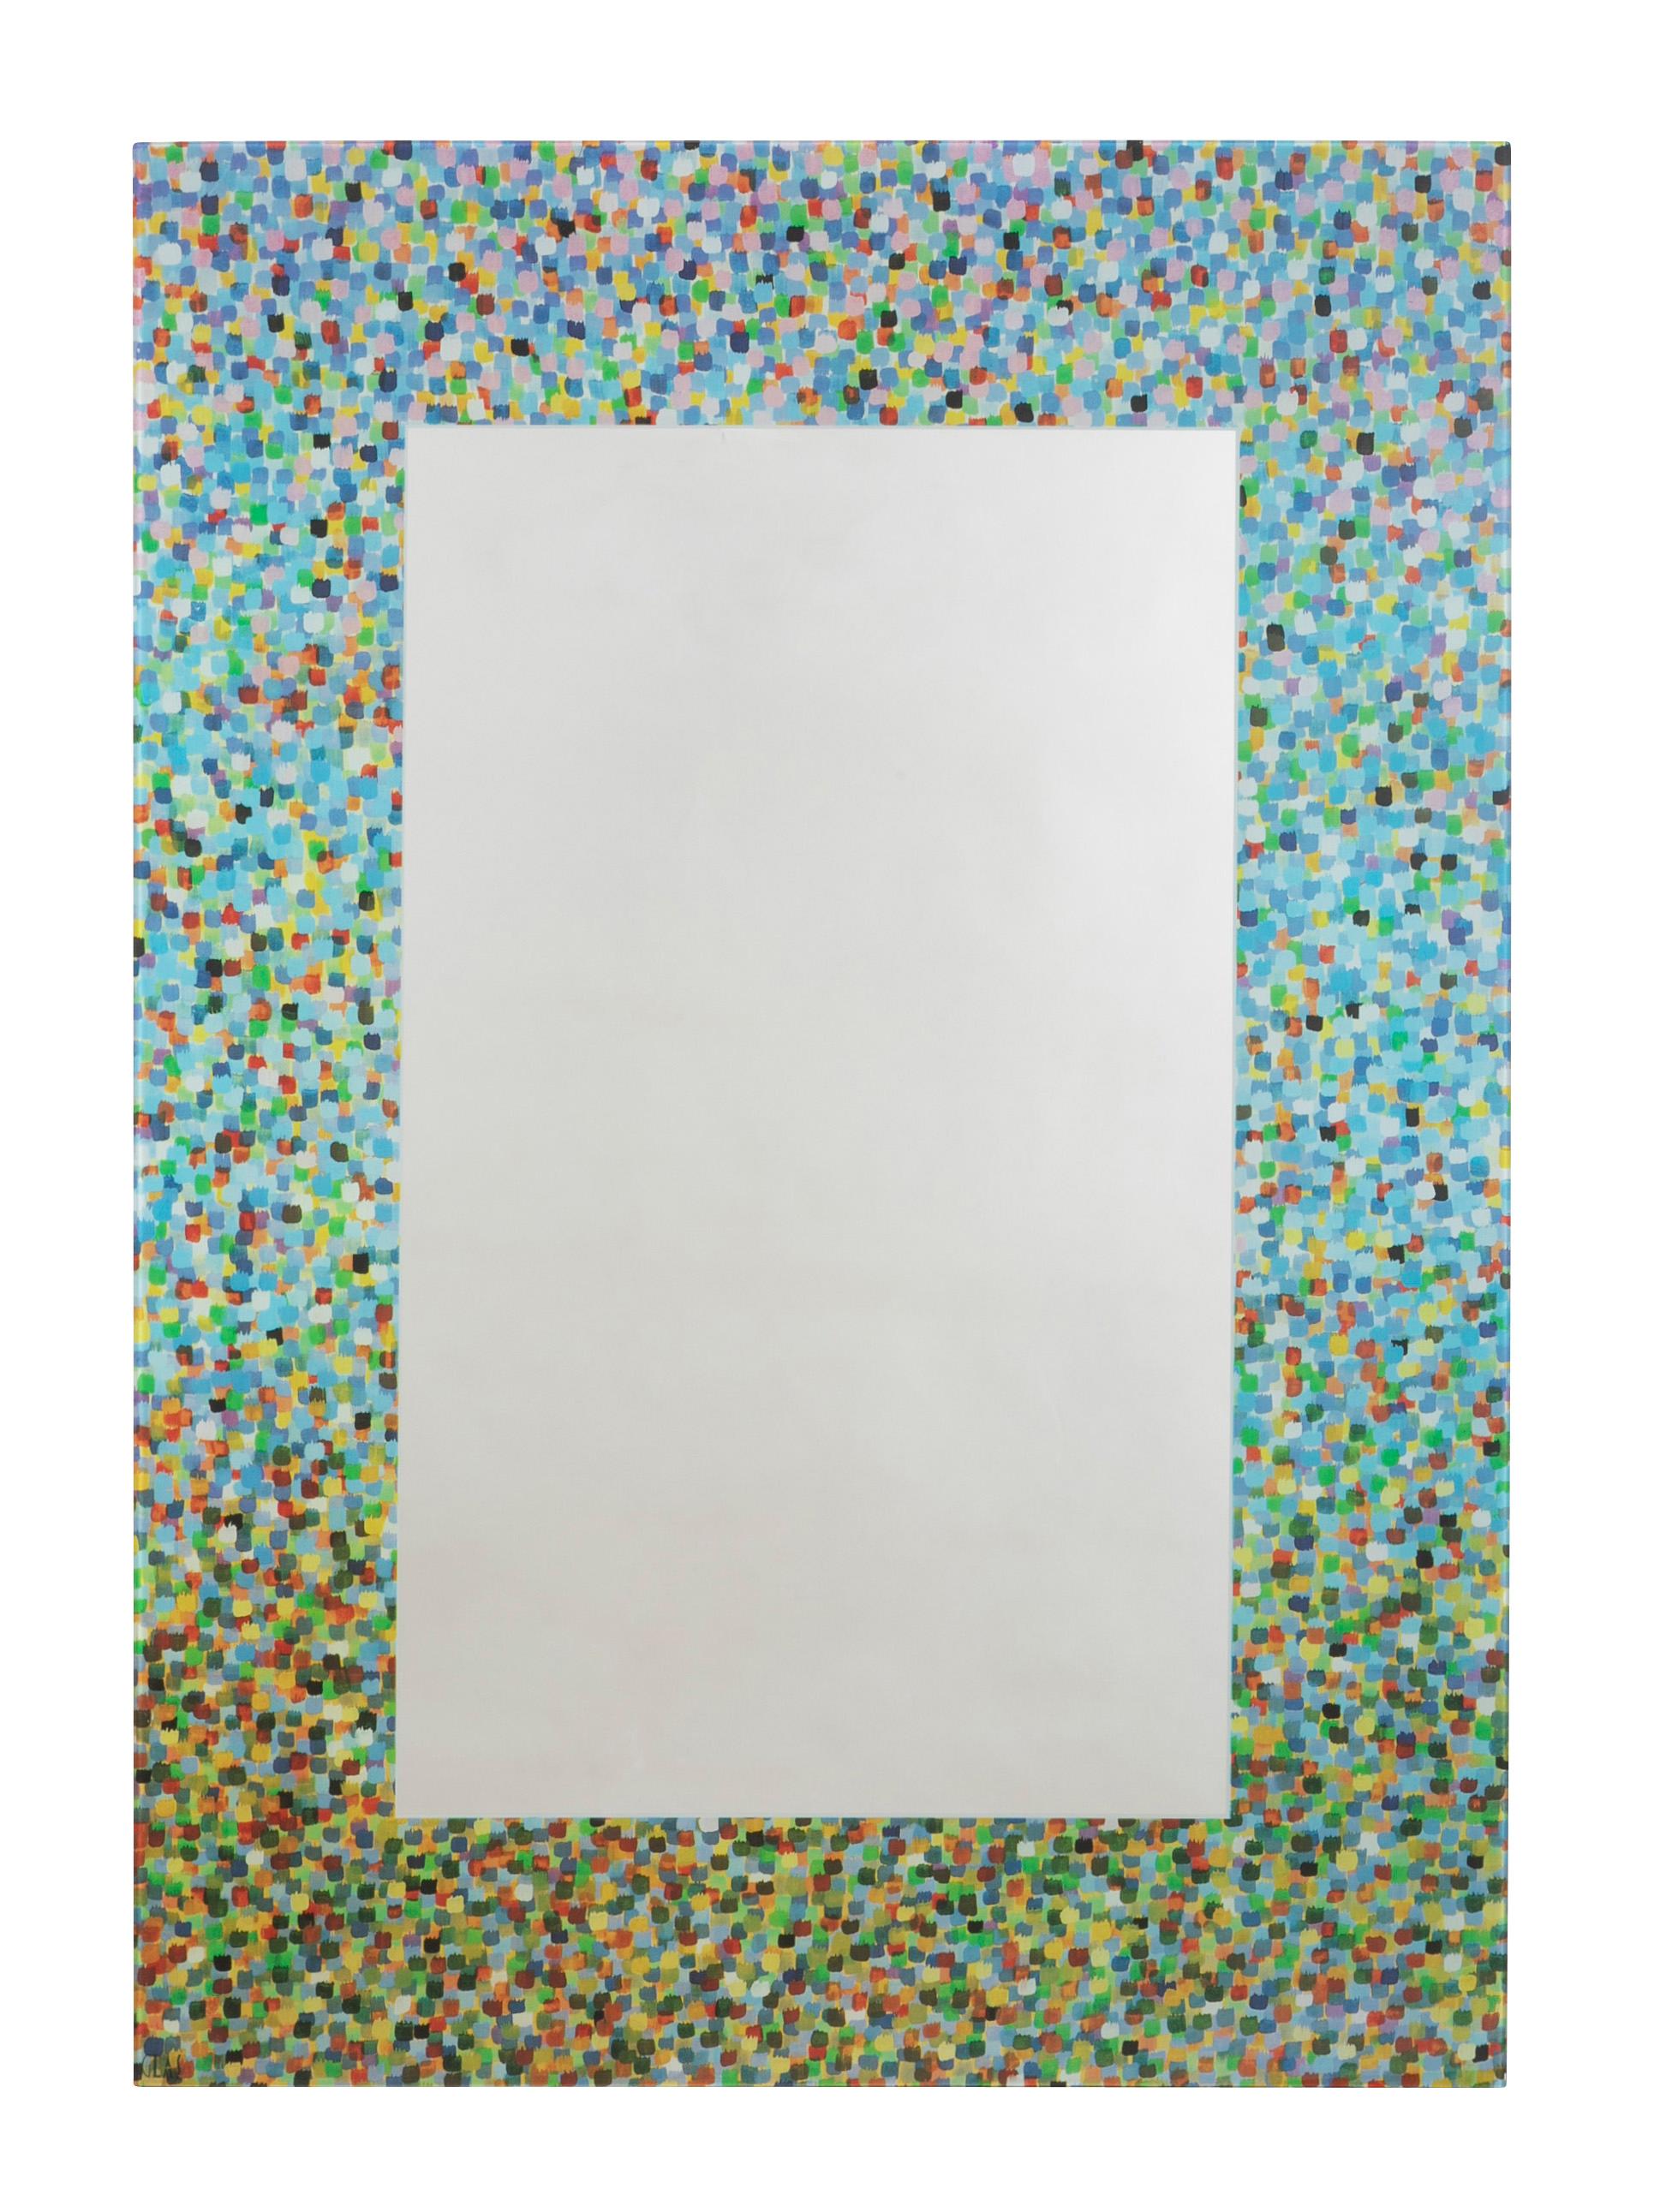 A wismical multi colored mirror designed by Alessandro Mendini and produced by Glas Italia.